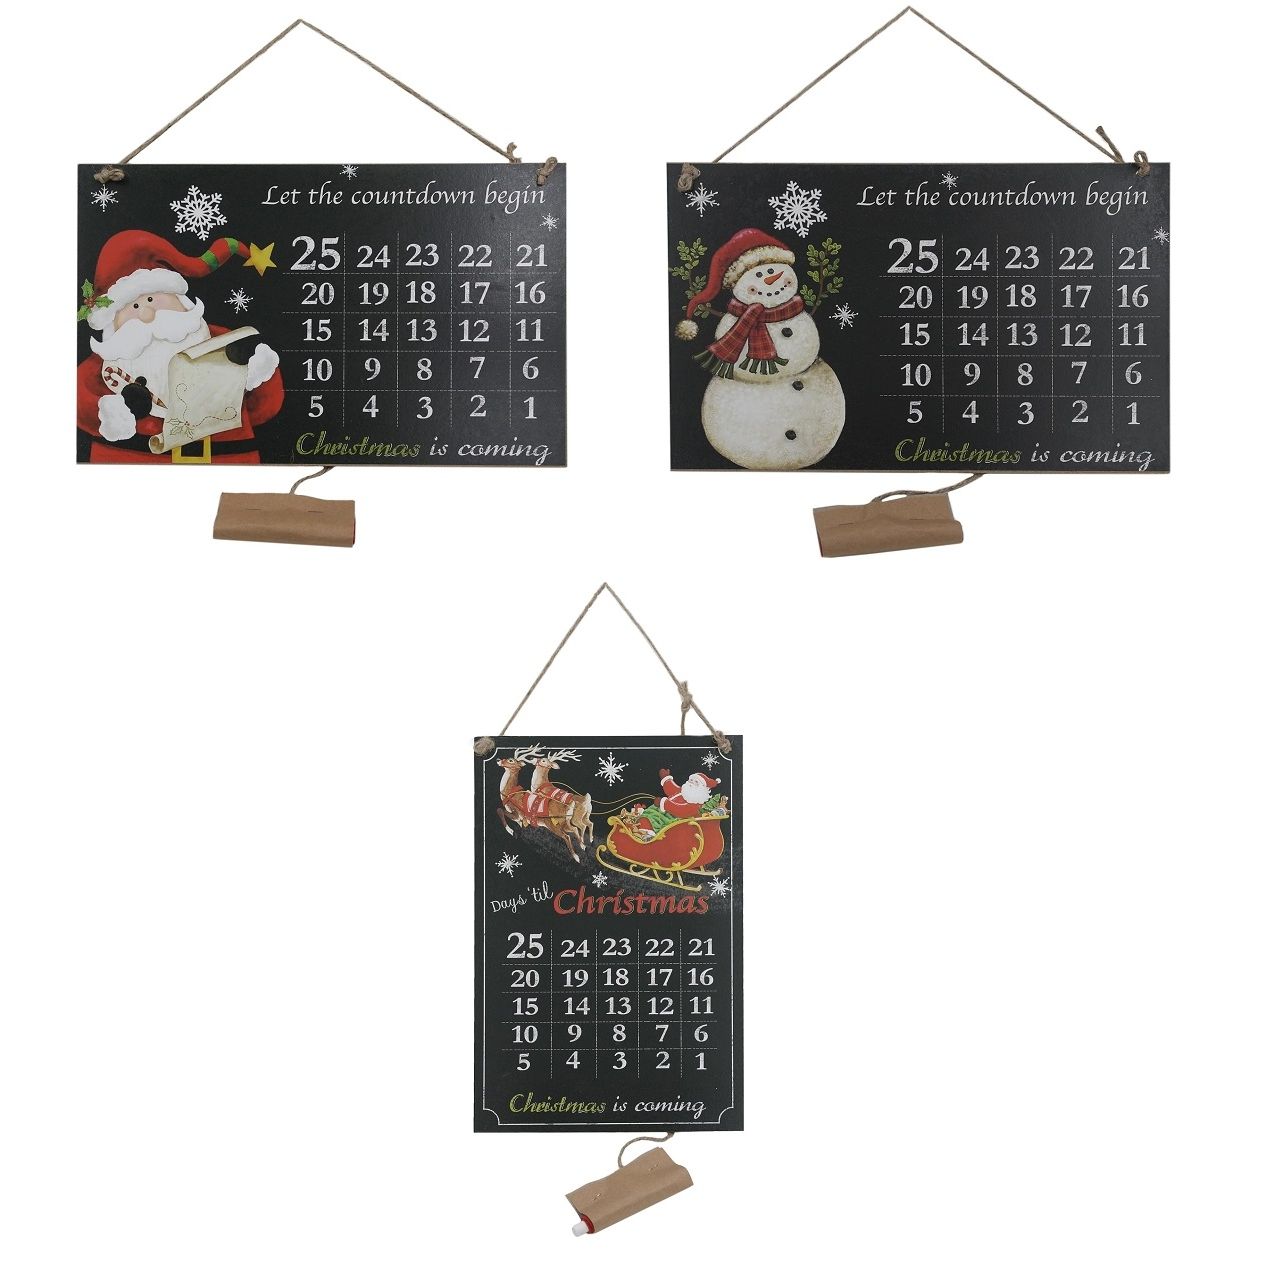 Christmas Countdown Hanging Plaque